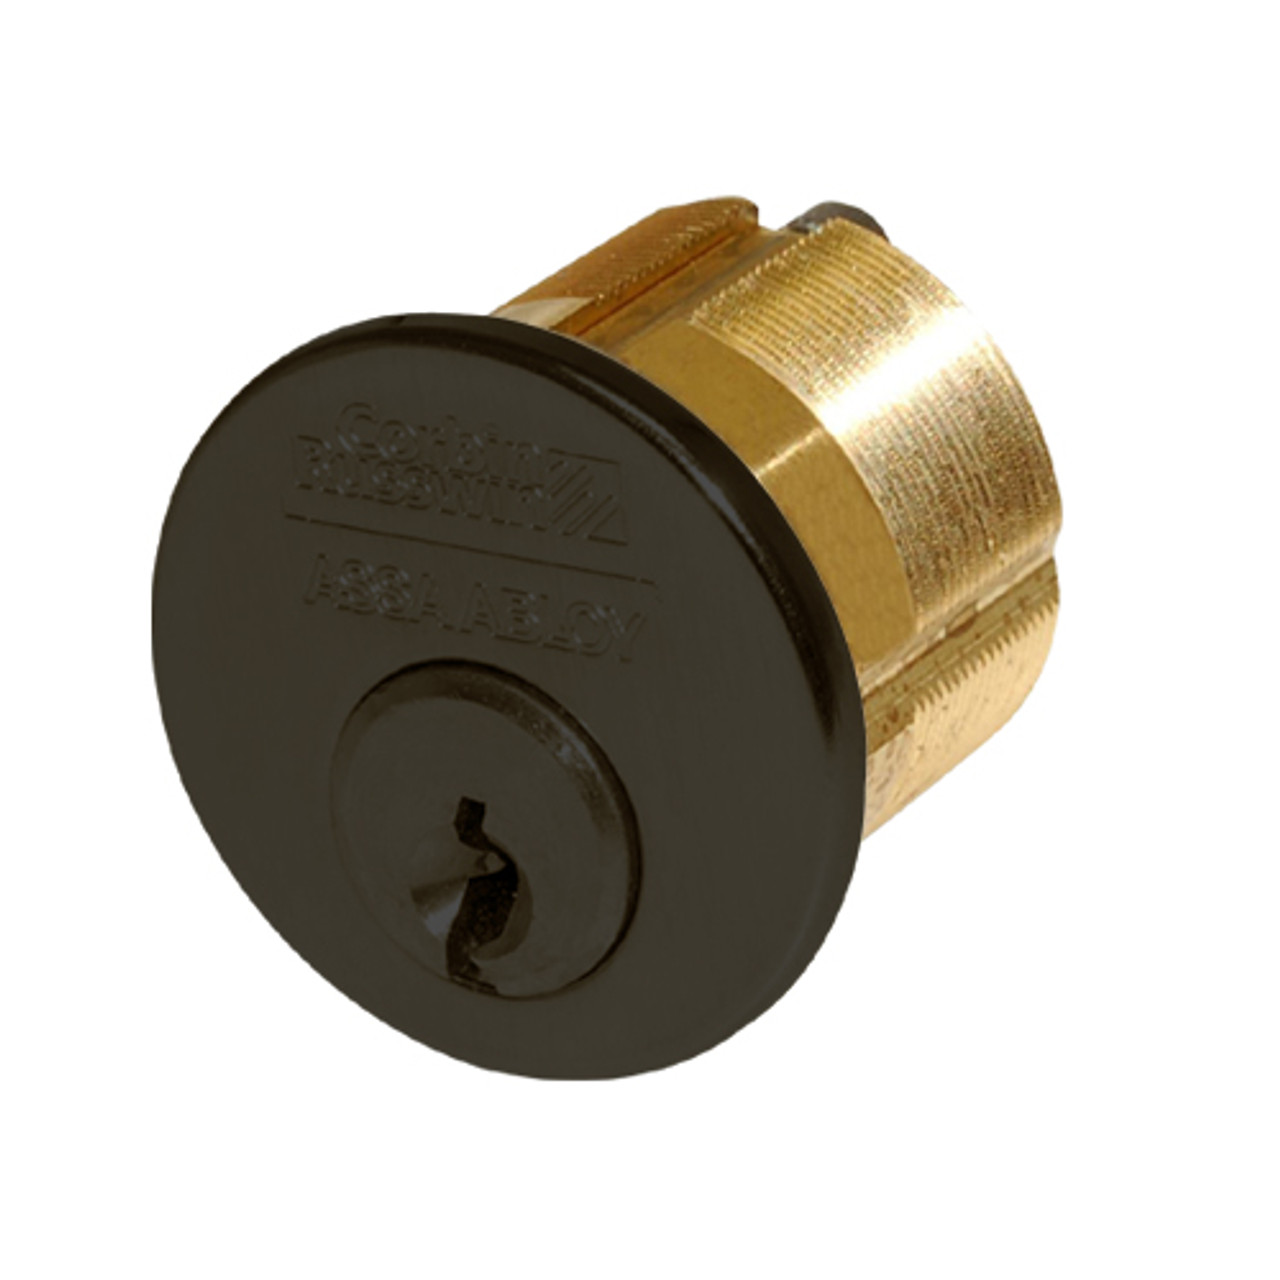 CR1000-200-A02-6-L1-613 Corbin Conventional Mortise Cylinder for Mortise Lock and DL3000 Deadlocks with Straight Cam in Oil Rubbed Bronze Finish